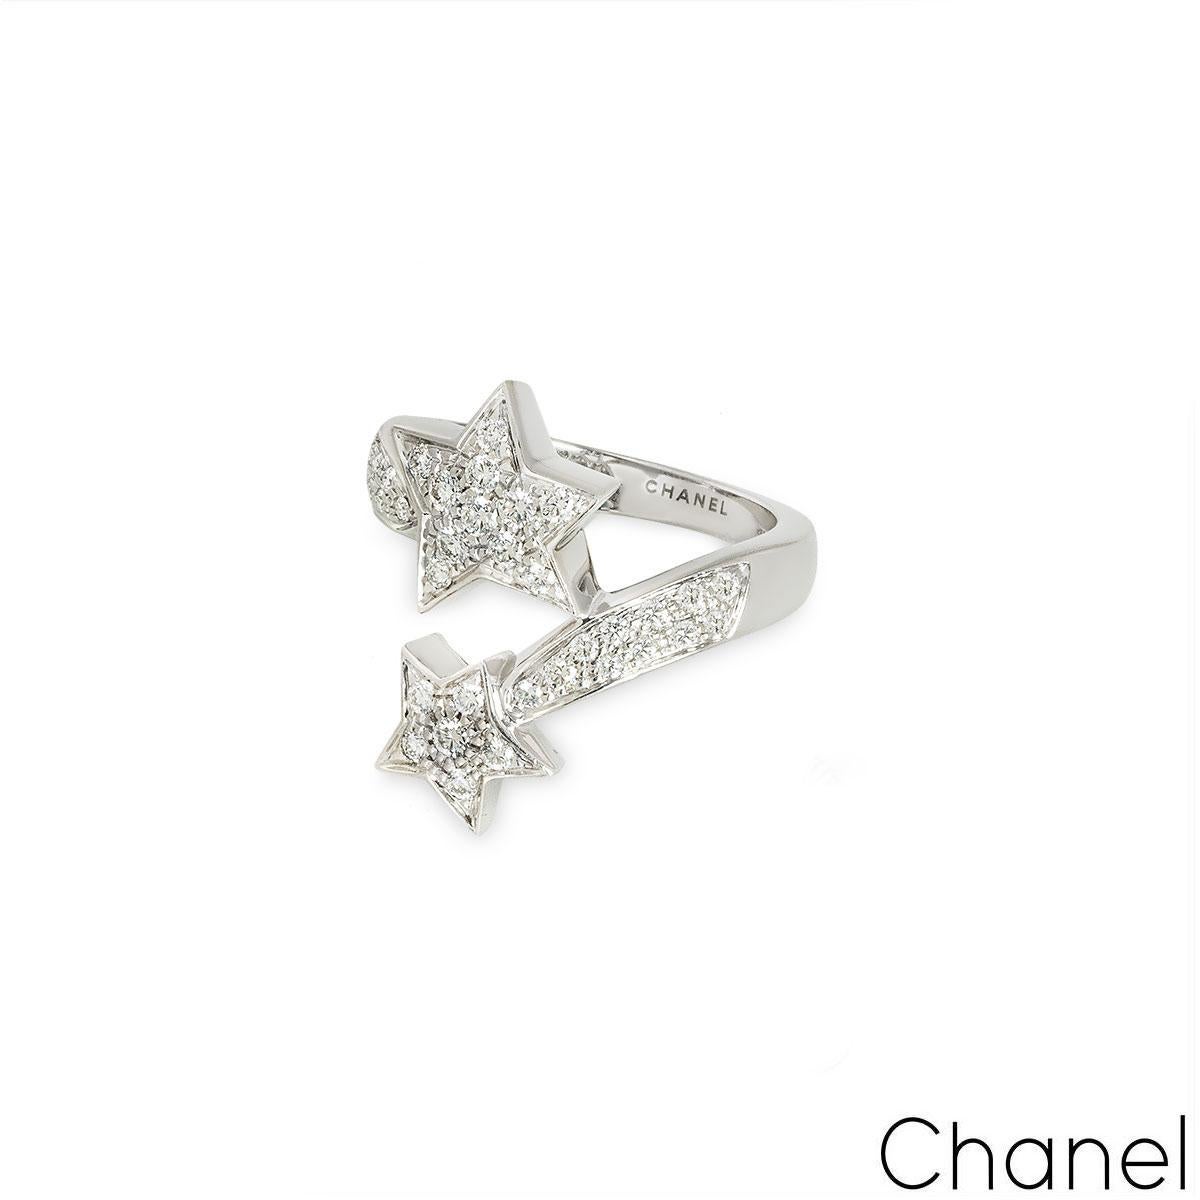 Chanel White Gold Diamond Comete Geode Ring J0387 In Excellent Condition For Sale In London, GB